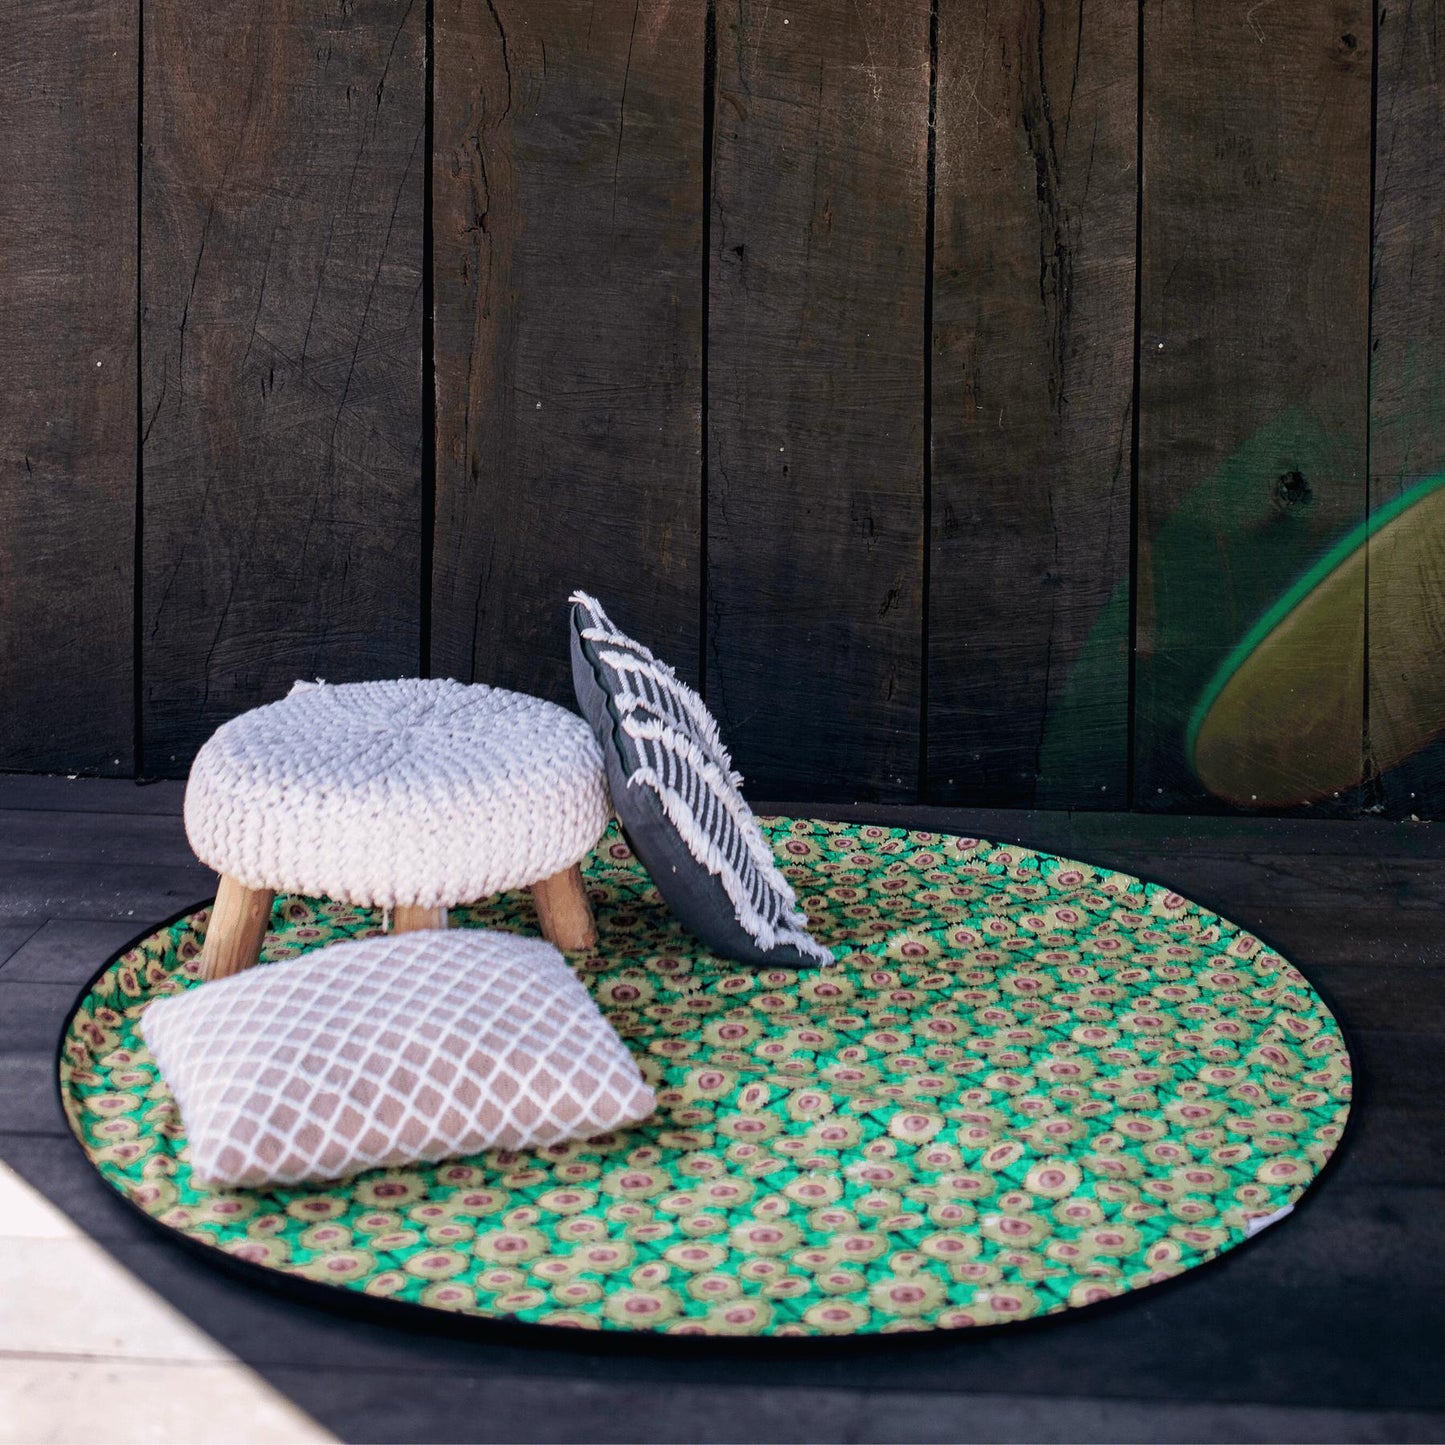 Earthside Eco Bums Giant Family Waterproof Mat PREORDER Open-Play Mat-Earthside Eco Bums-Sunny Daze-The Nappy Market